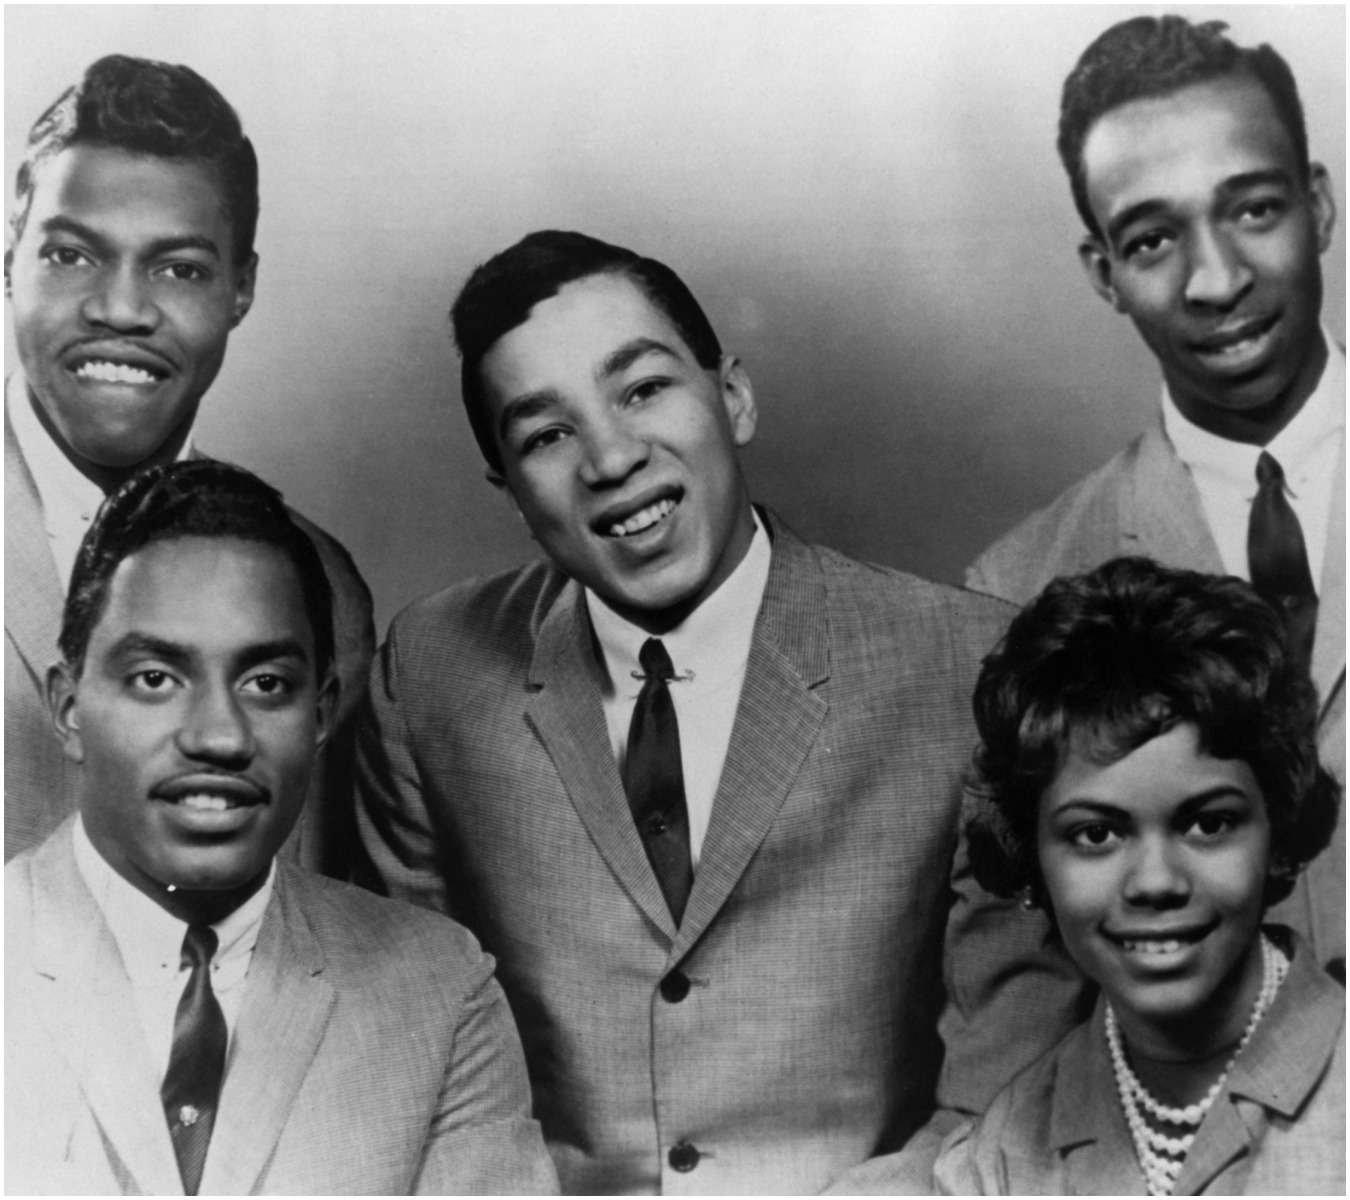 Claudette Rogers Robinson with the Miracles